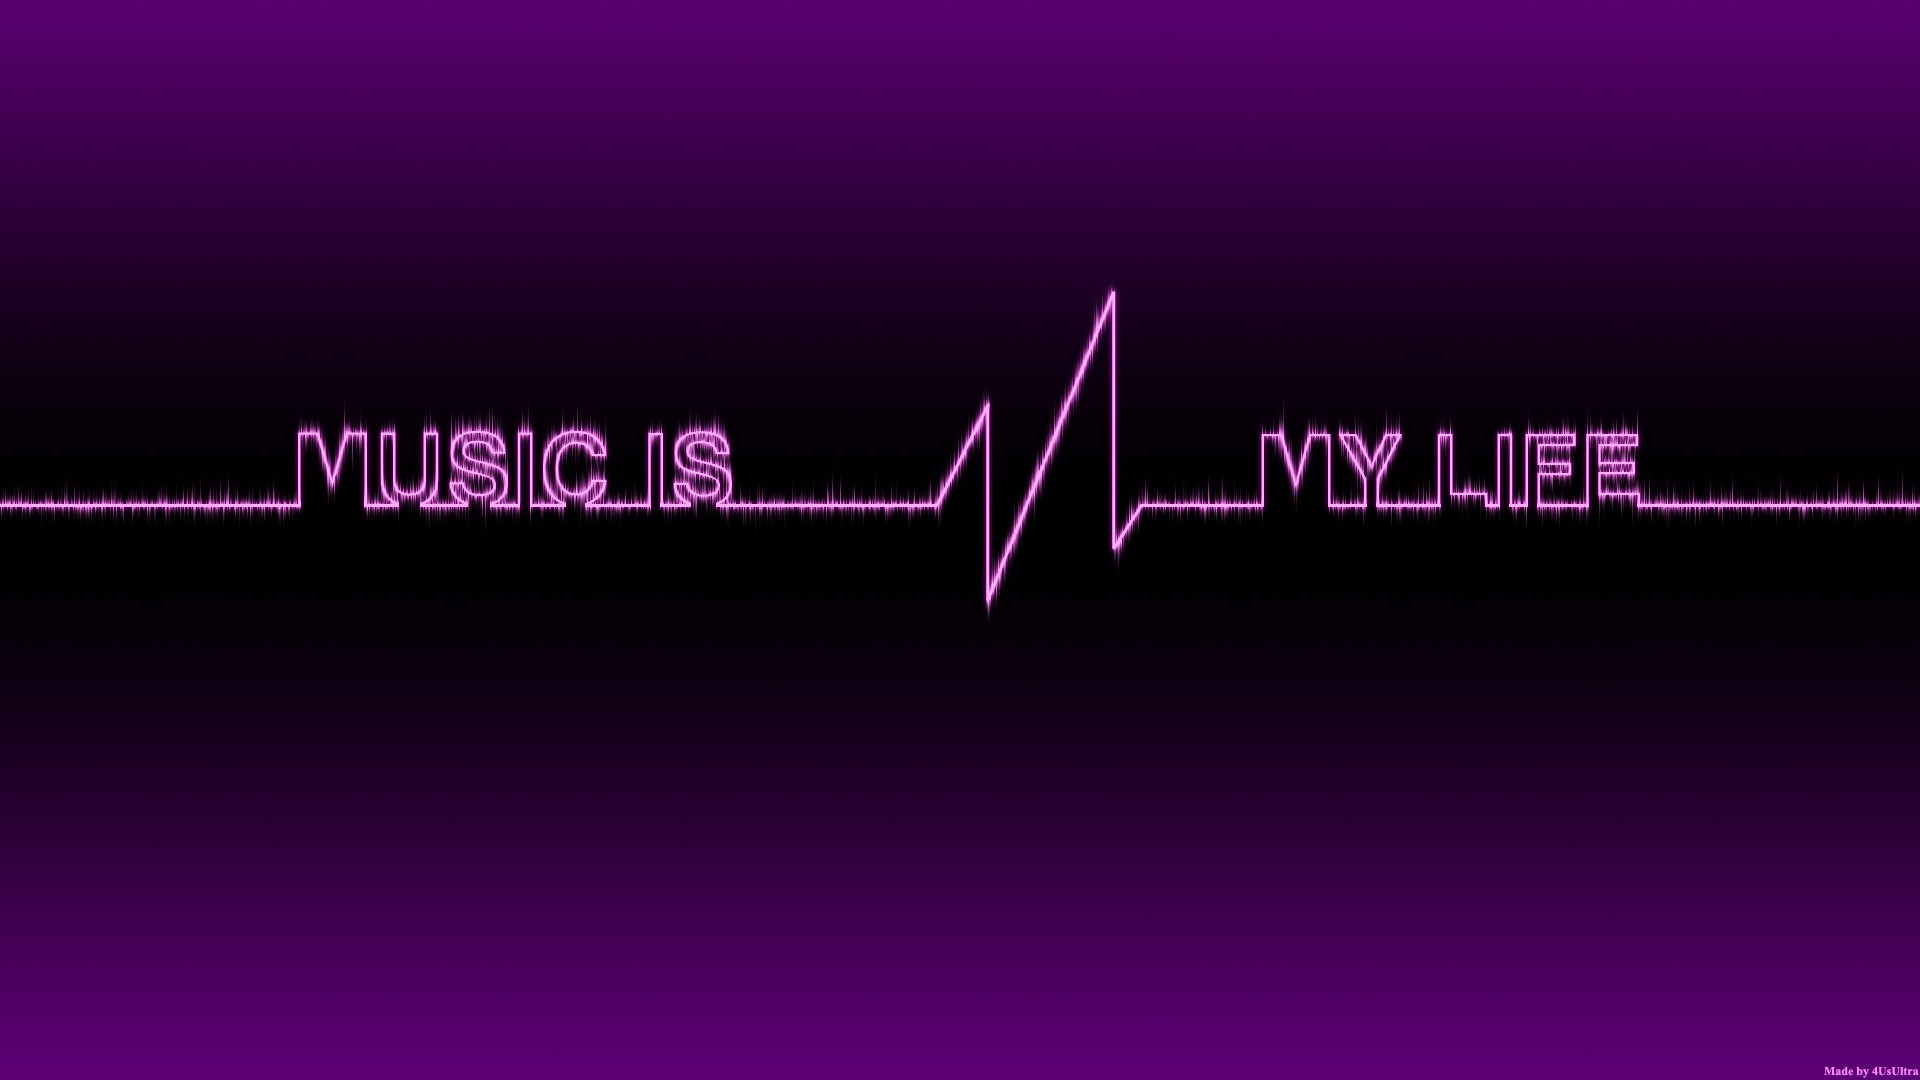 1096961-music-is-my-life-wallpaper-1920x1080-picture.jpg